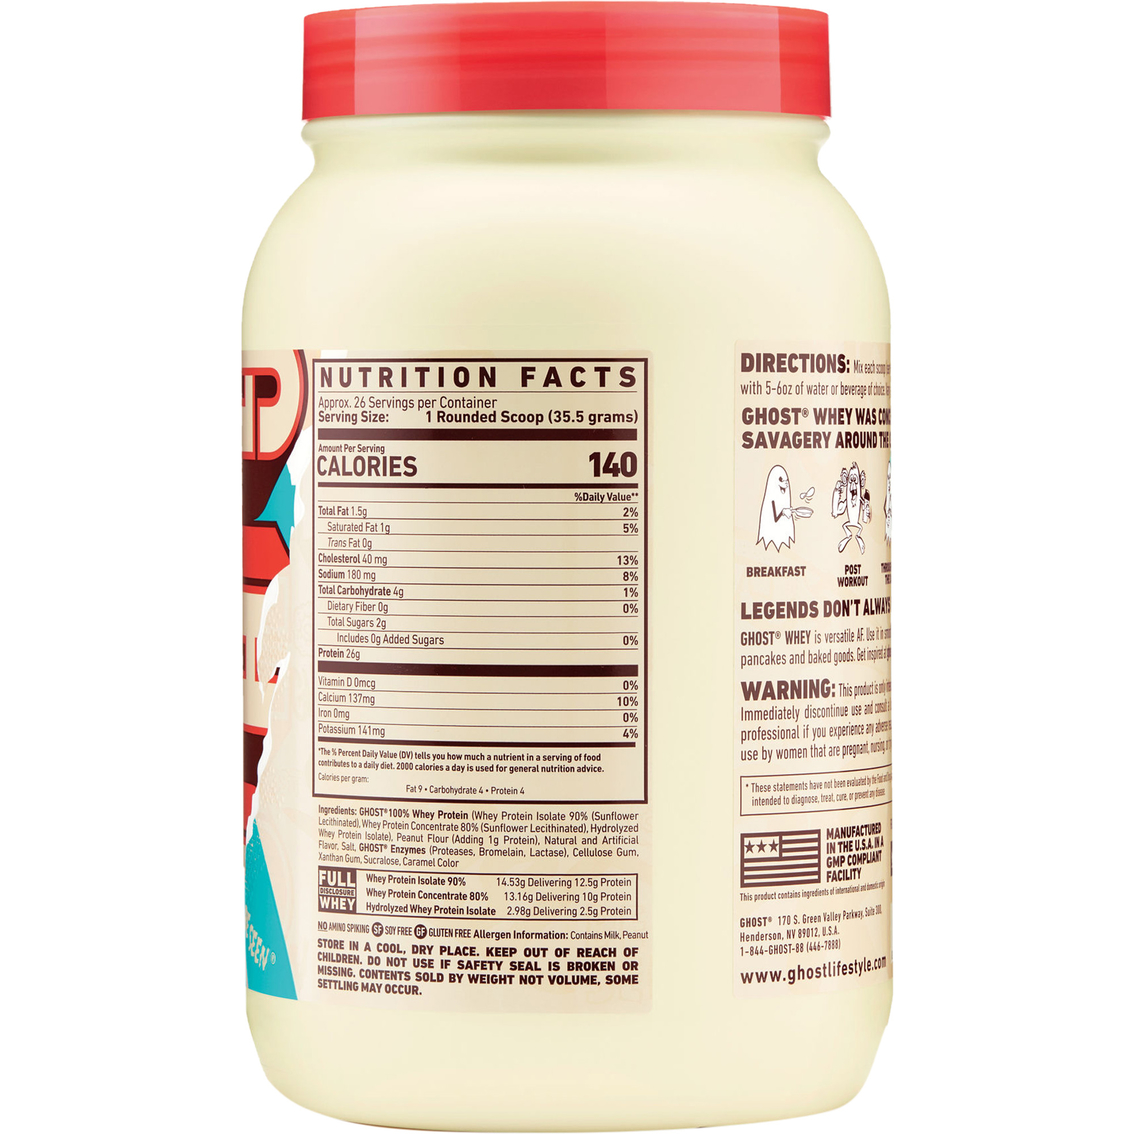 Ghost Whey Protein 2 lb. - Image 2 of 2